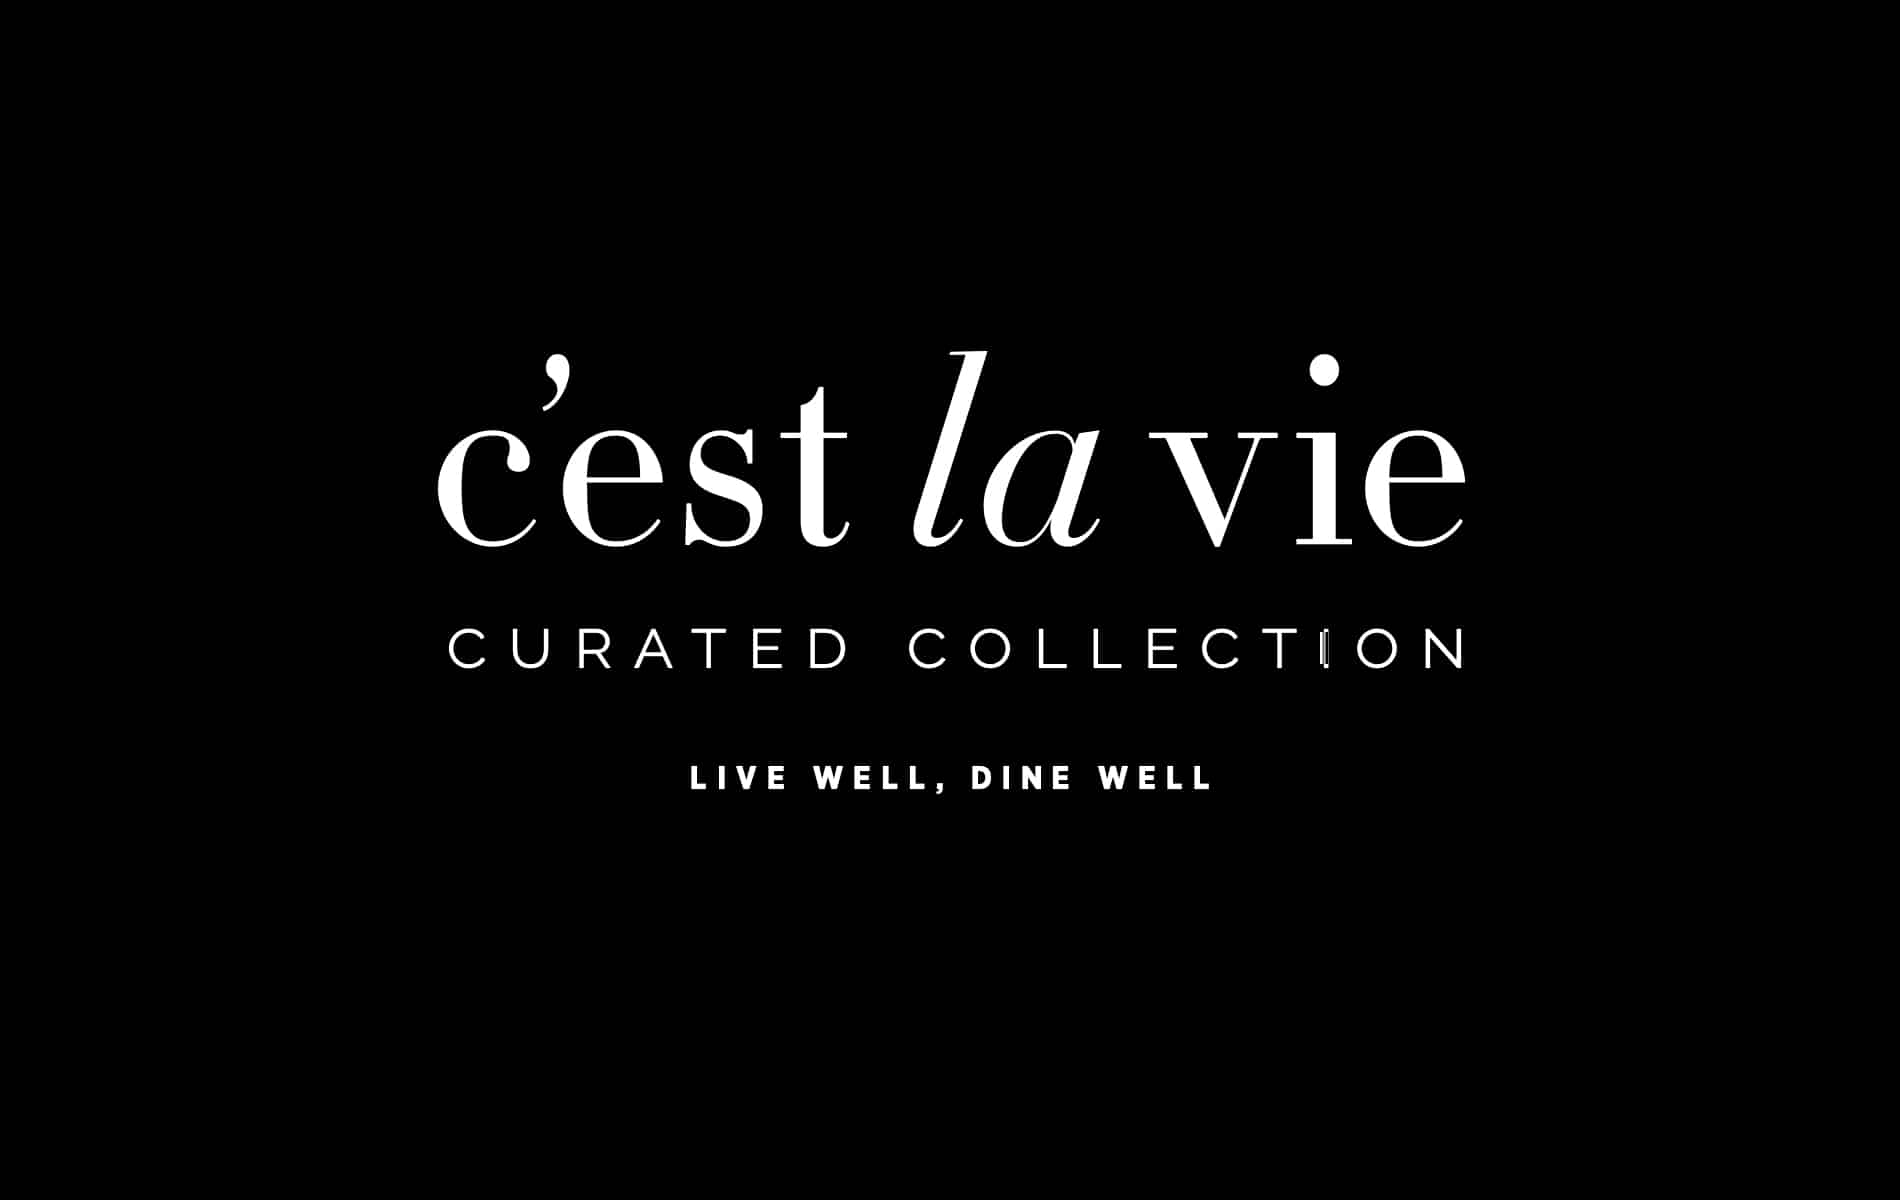 vie magazine c'est la vie may 2019 culinary issue, live well dine well